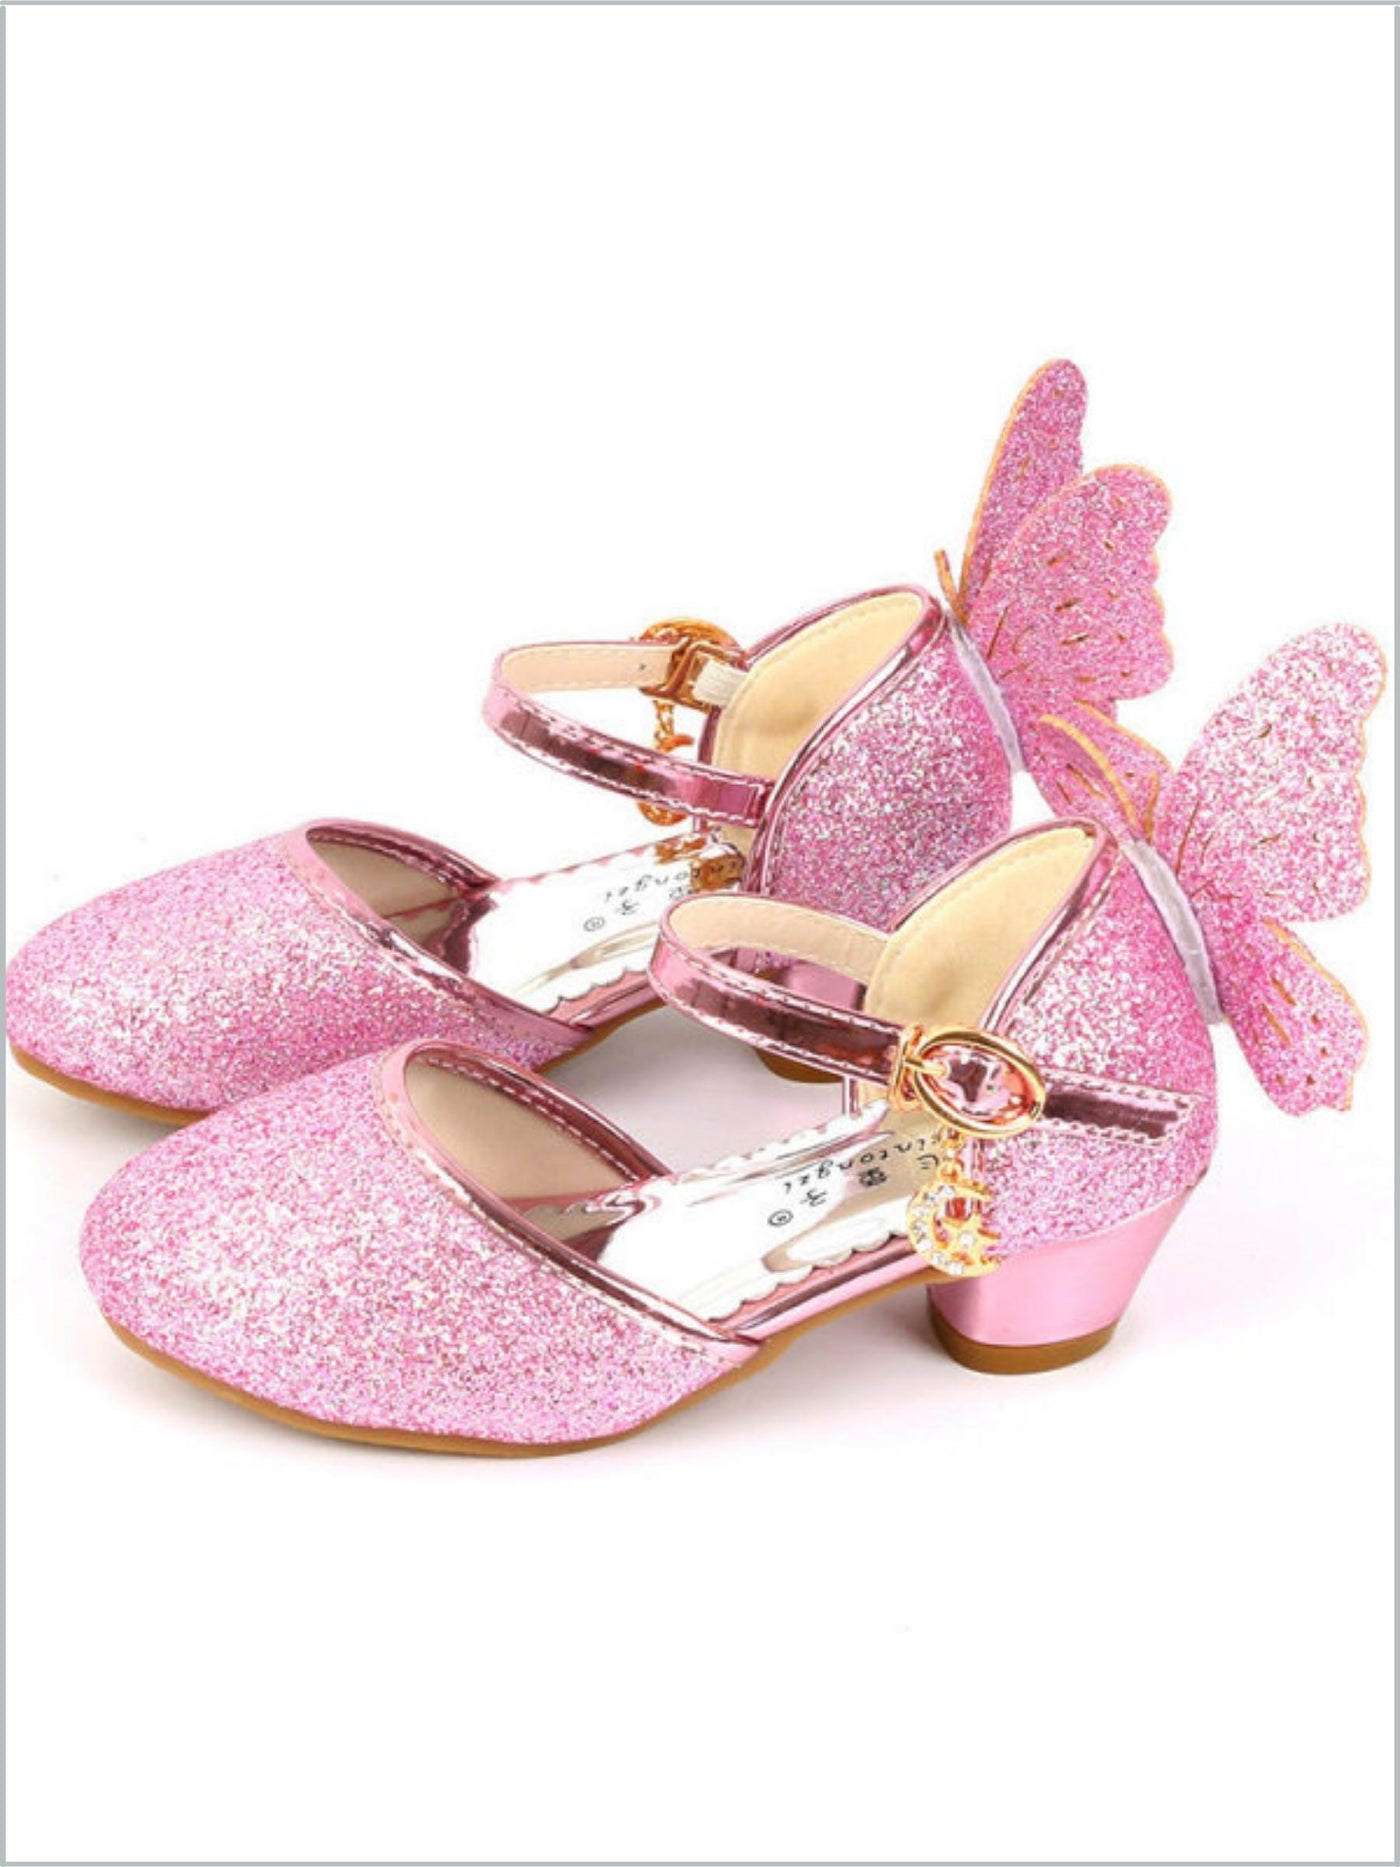 Buy Butterfly Heels Online In India - Etsy India